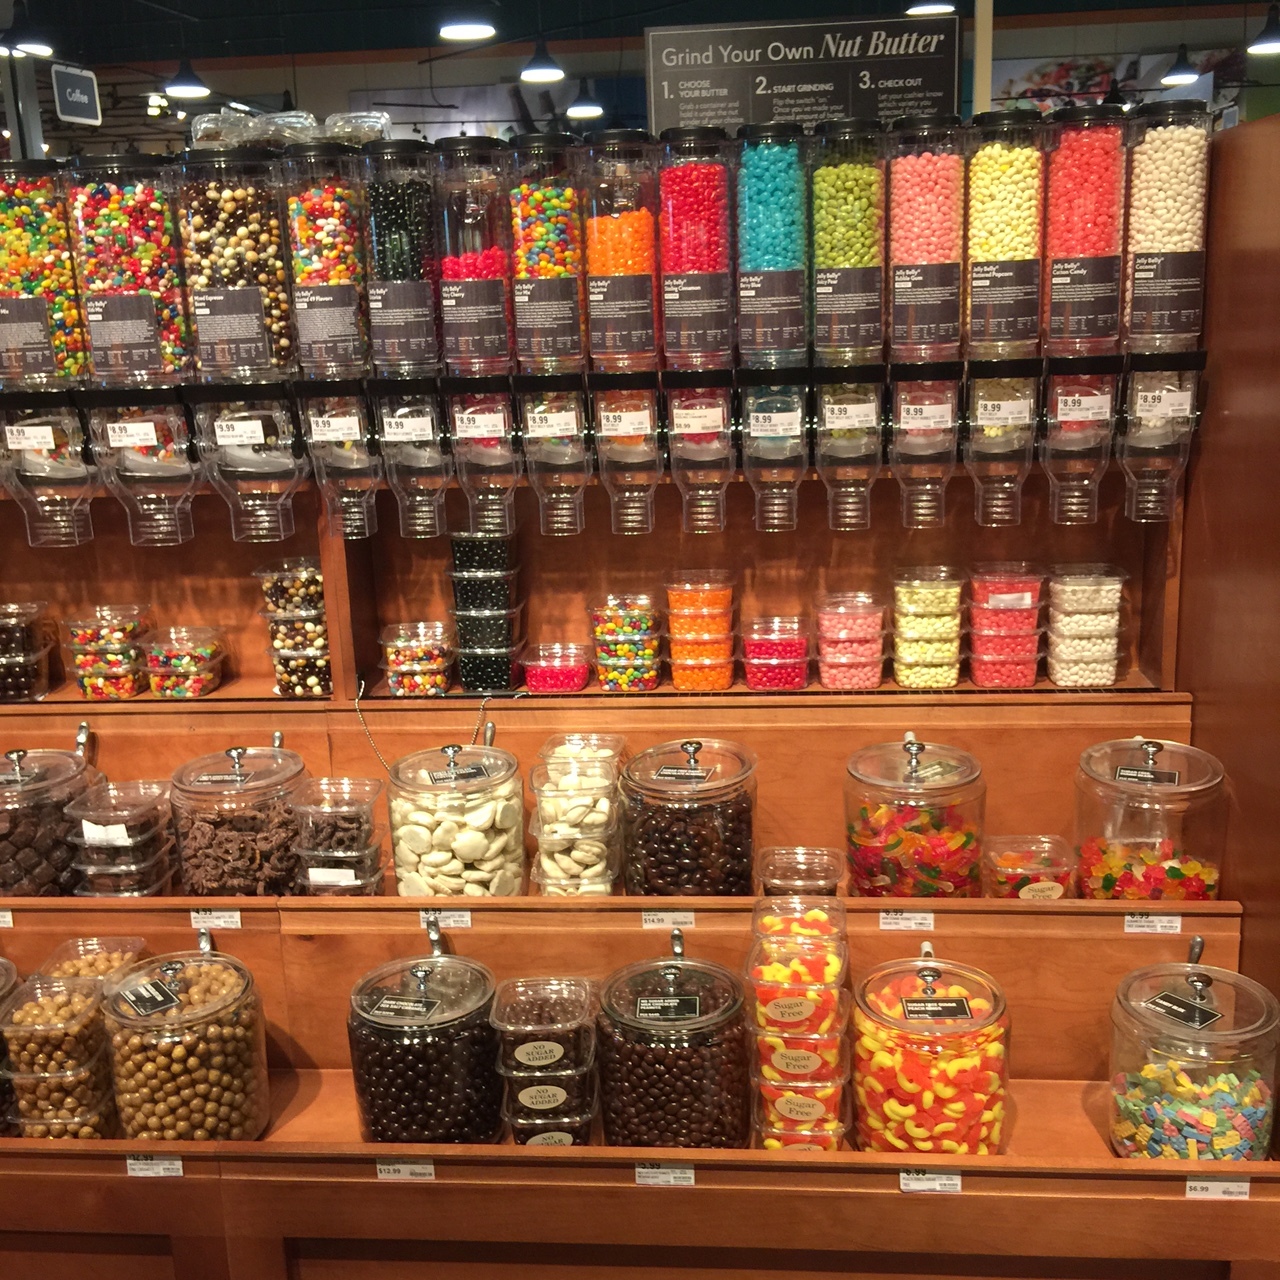 The bulk candy was moved to a dispenser system, although several jars remain for customers to dip into themselves.